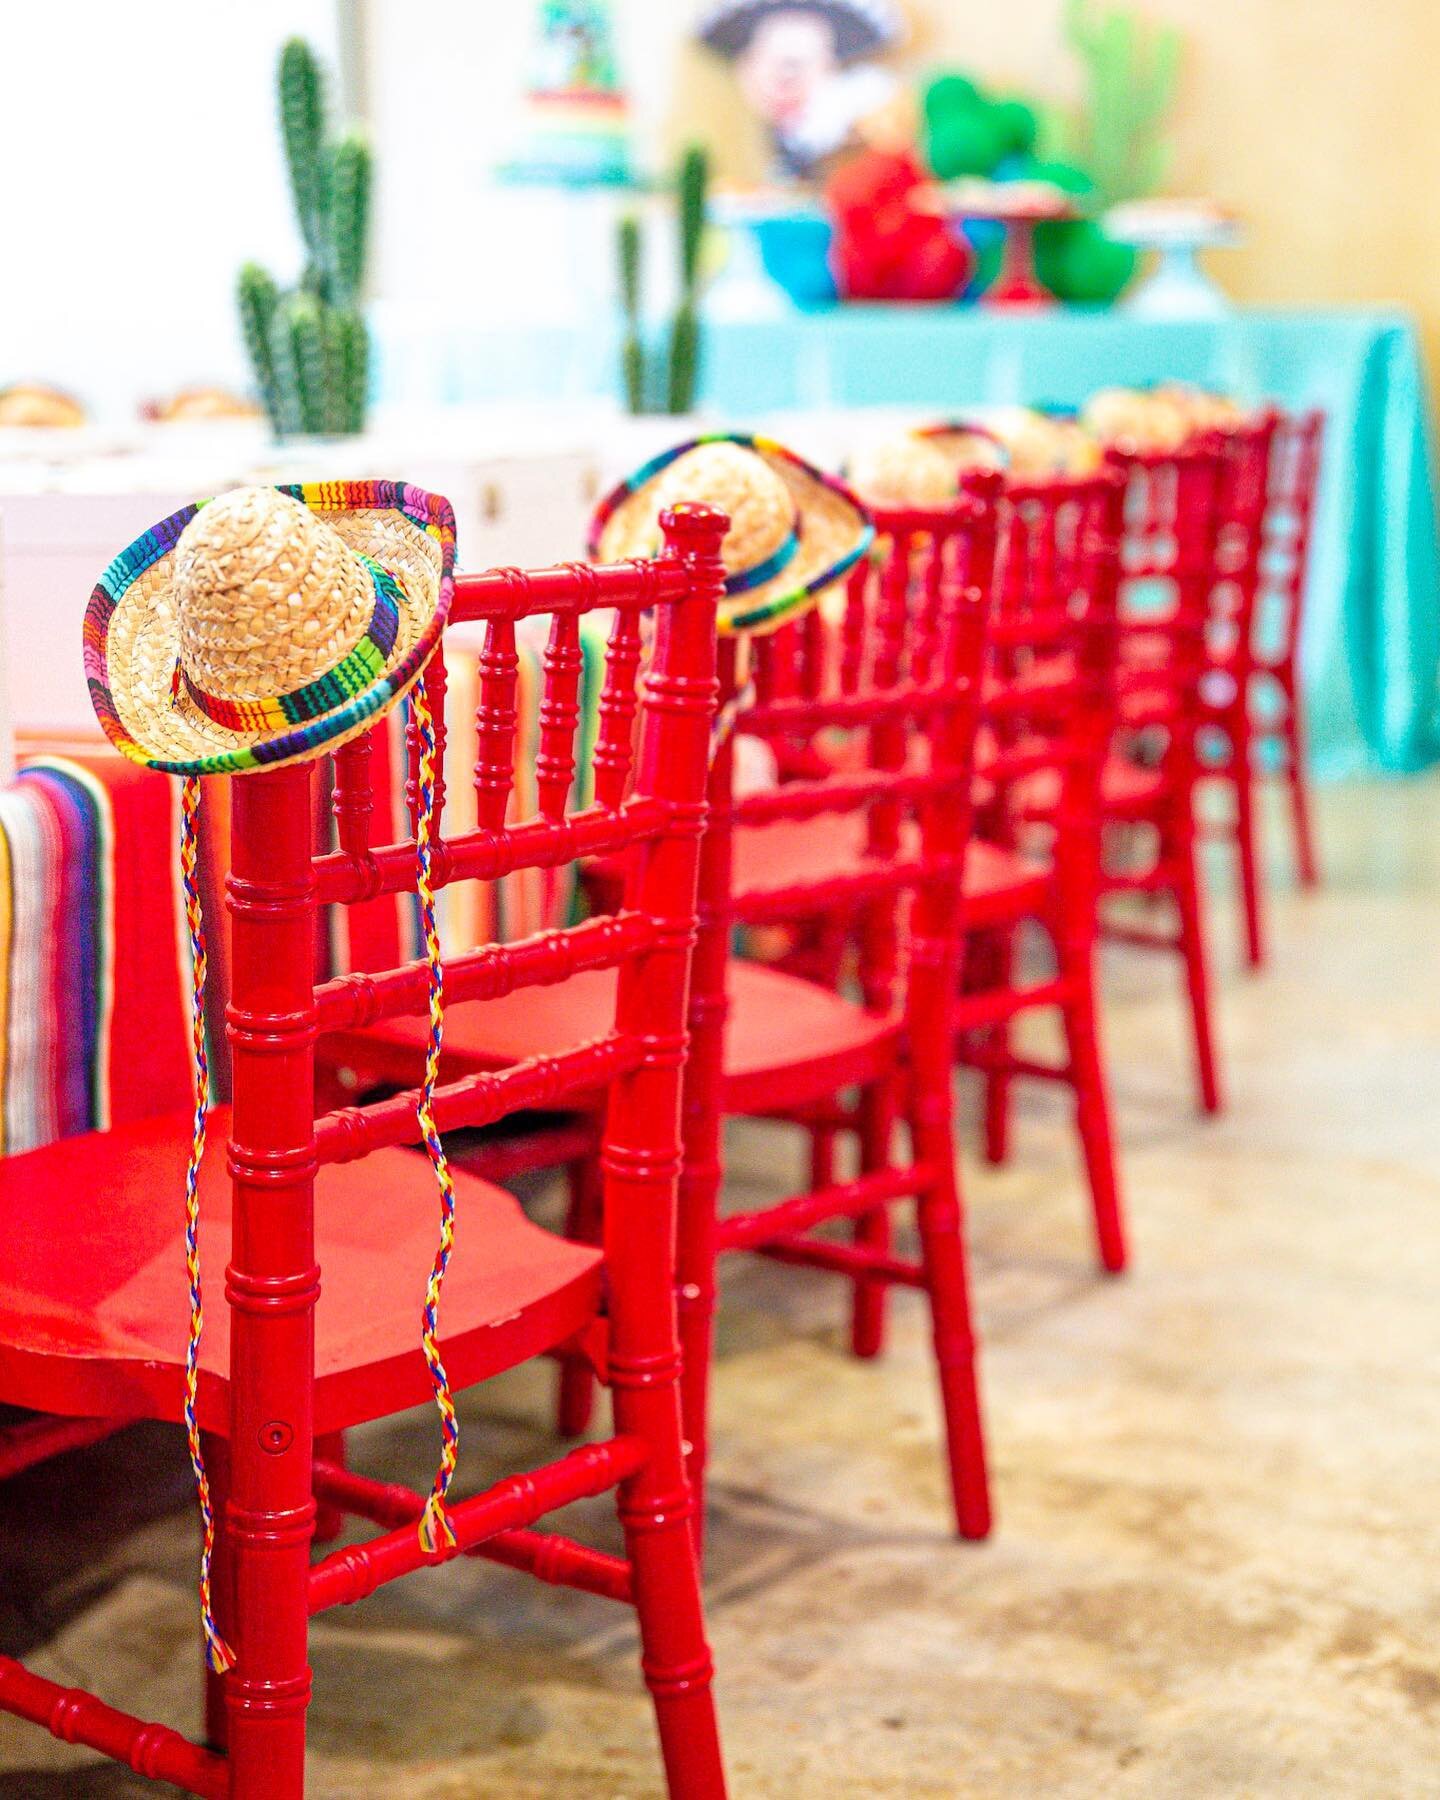 Grab your passports!! Mickey is going to Mexico 😍🌵🌮🇲🇽 #AyomisFirstBirthday 

.
.
.
.
.
event design: @_creativisuals 
kids chairs: @georgia_party_rentals 
📸: @gpmatlanta 
.
.
.
.
.
#CreatiVisualsAndEvents #AtlantaEventDesigner #AtlantaEventPlan